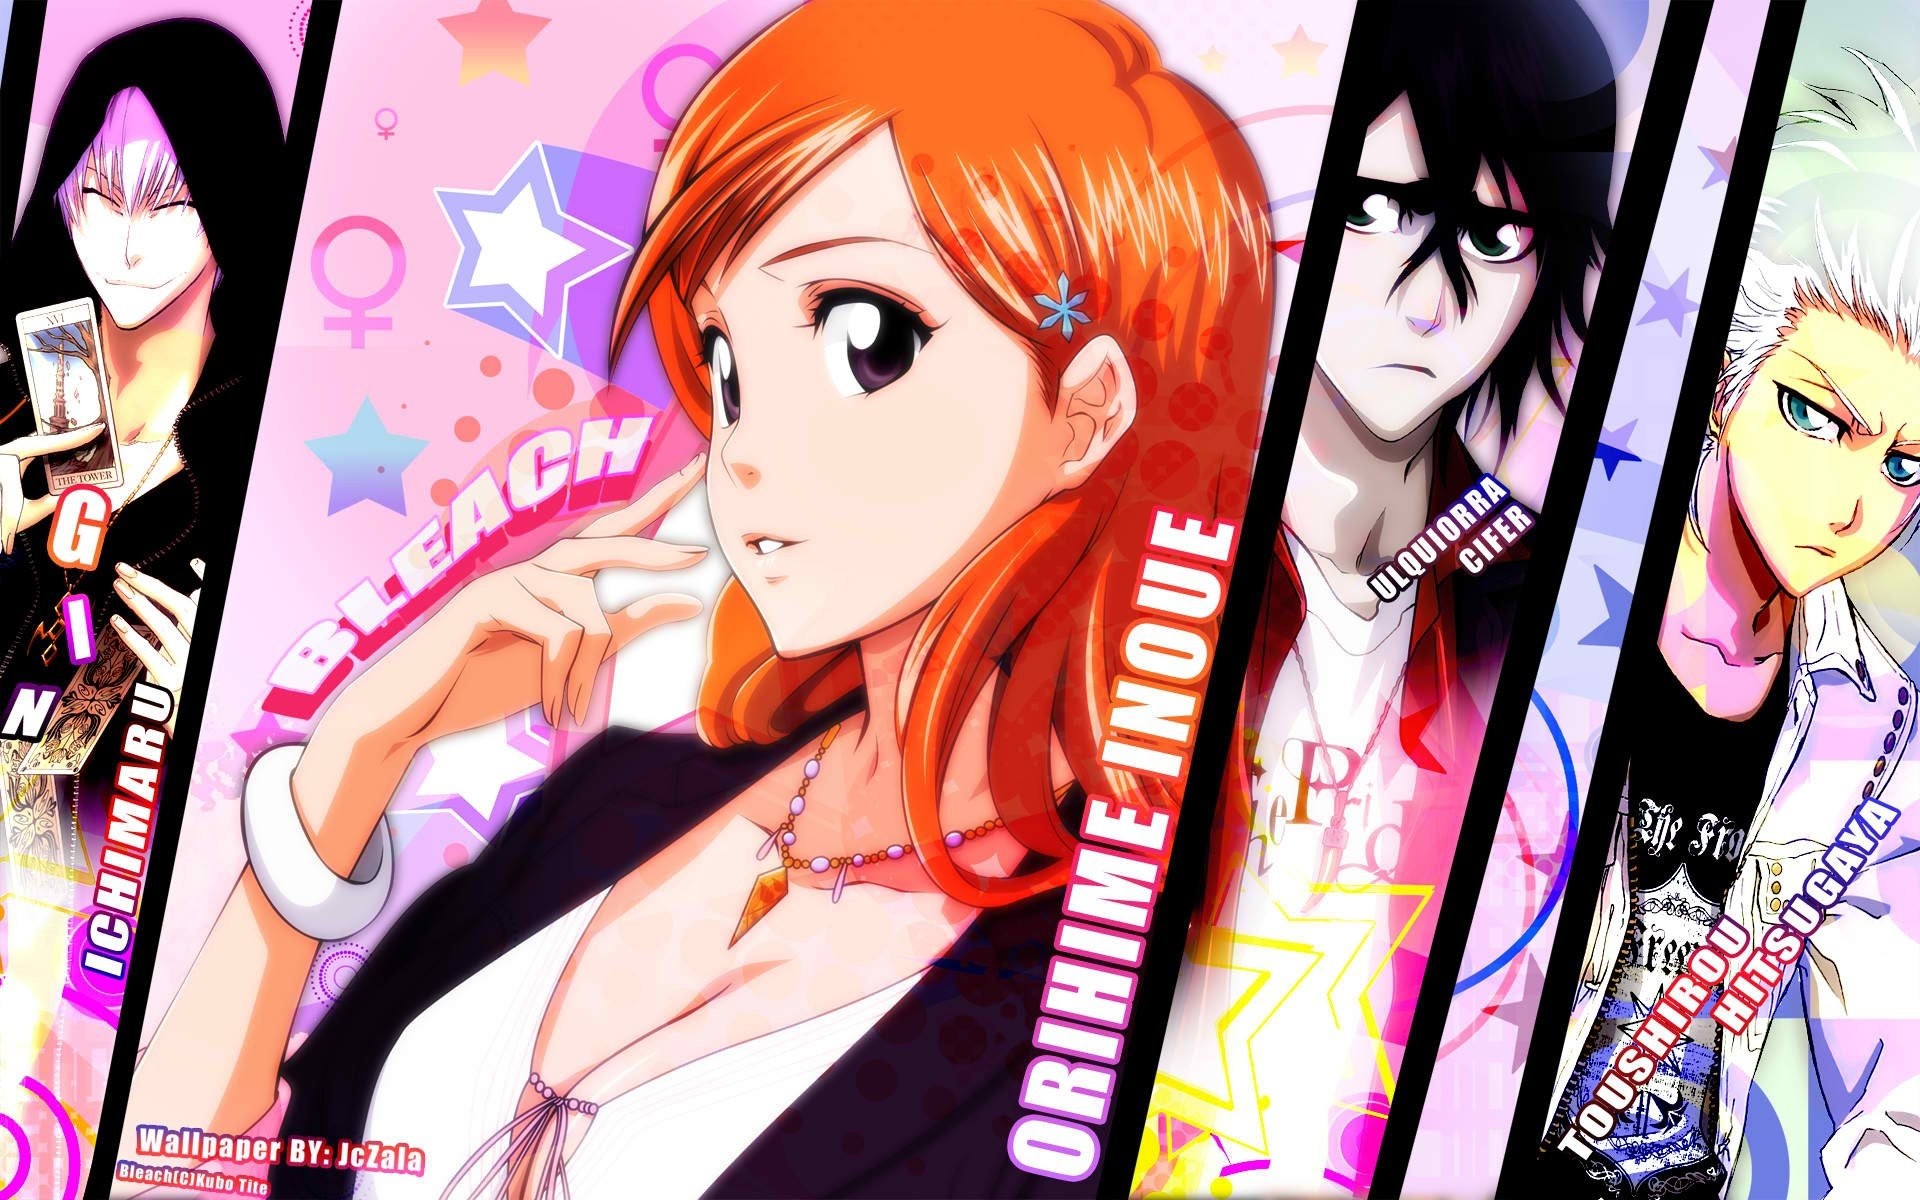 1920x1200 ... 819 Orihime Inoue HD Wallpapers | Backgrounds - Wallpaper Abyss ...